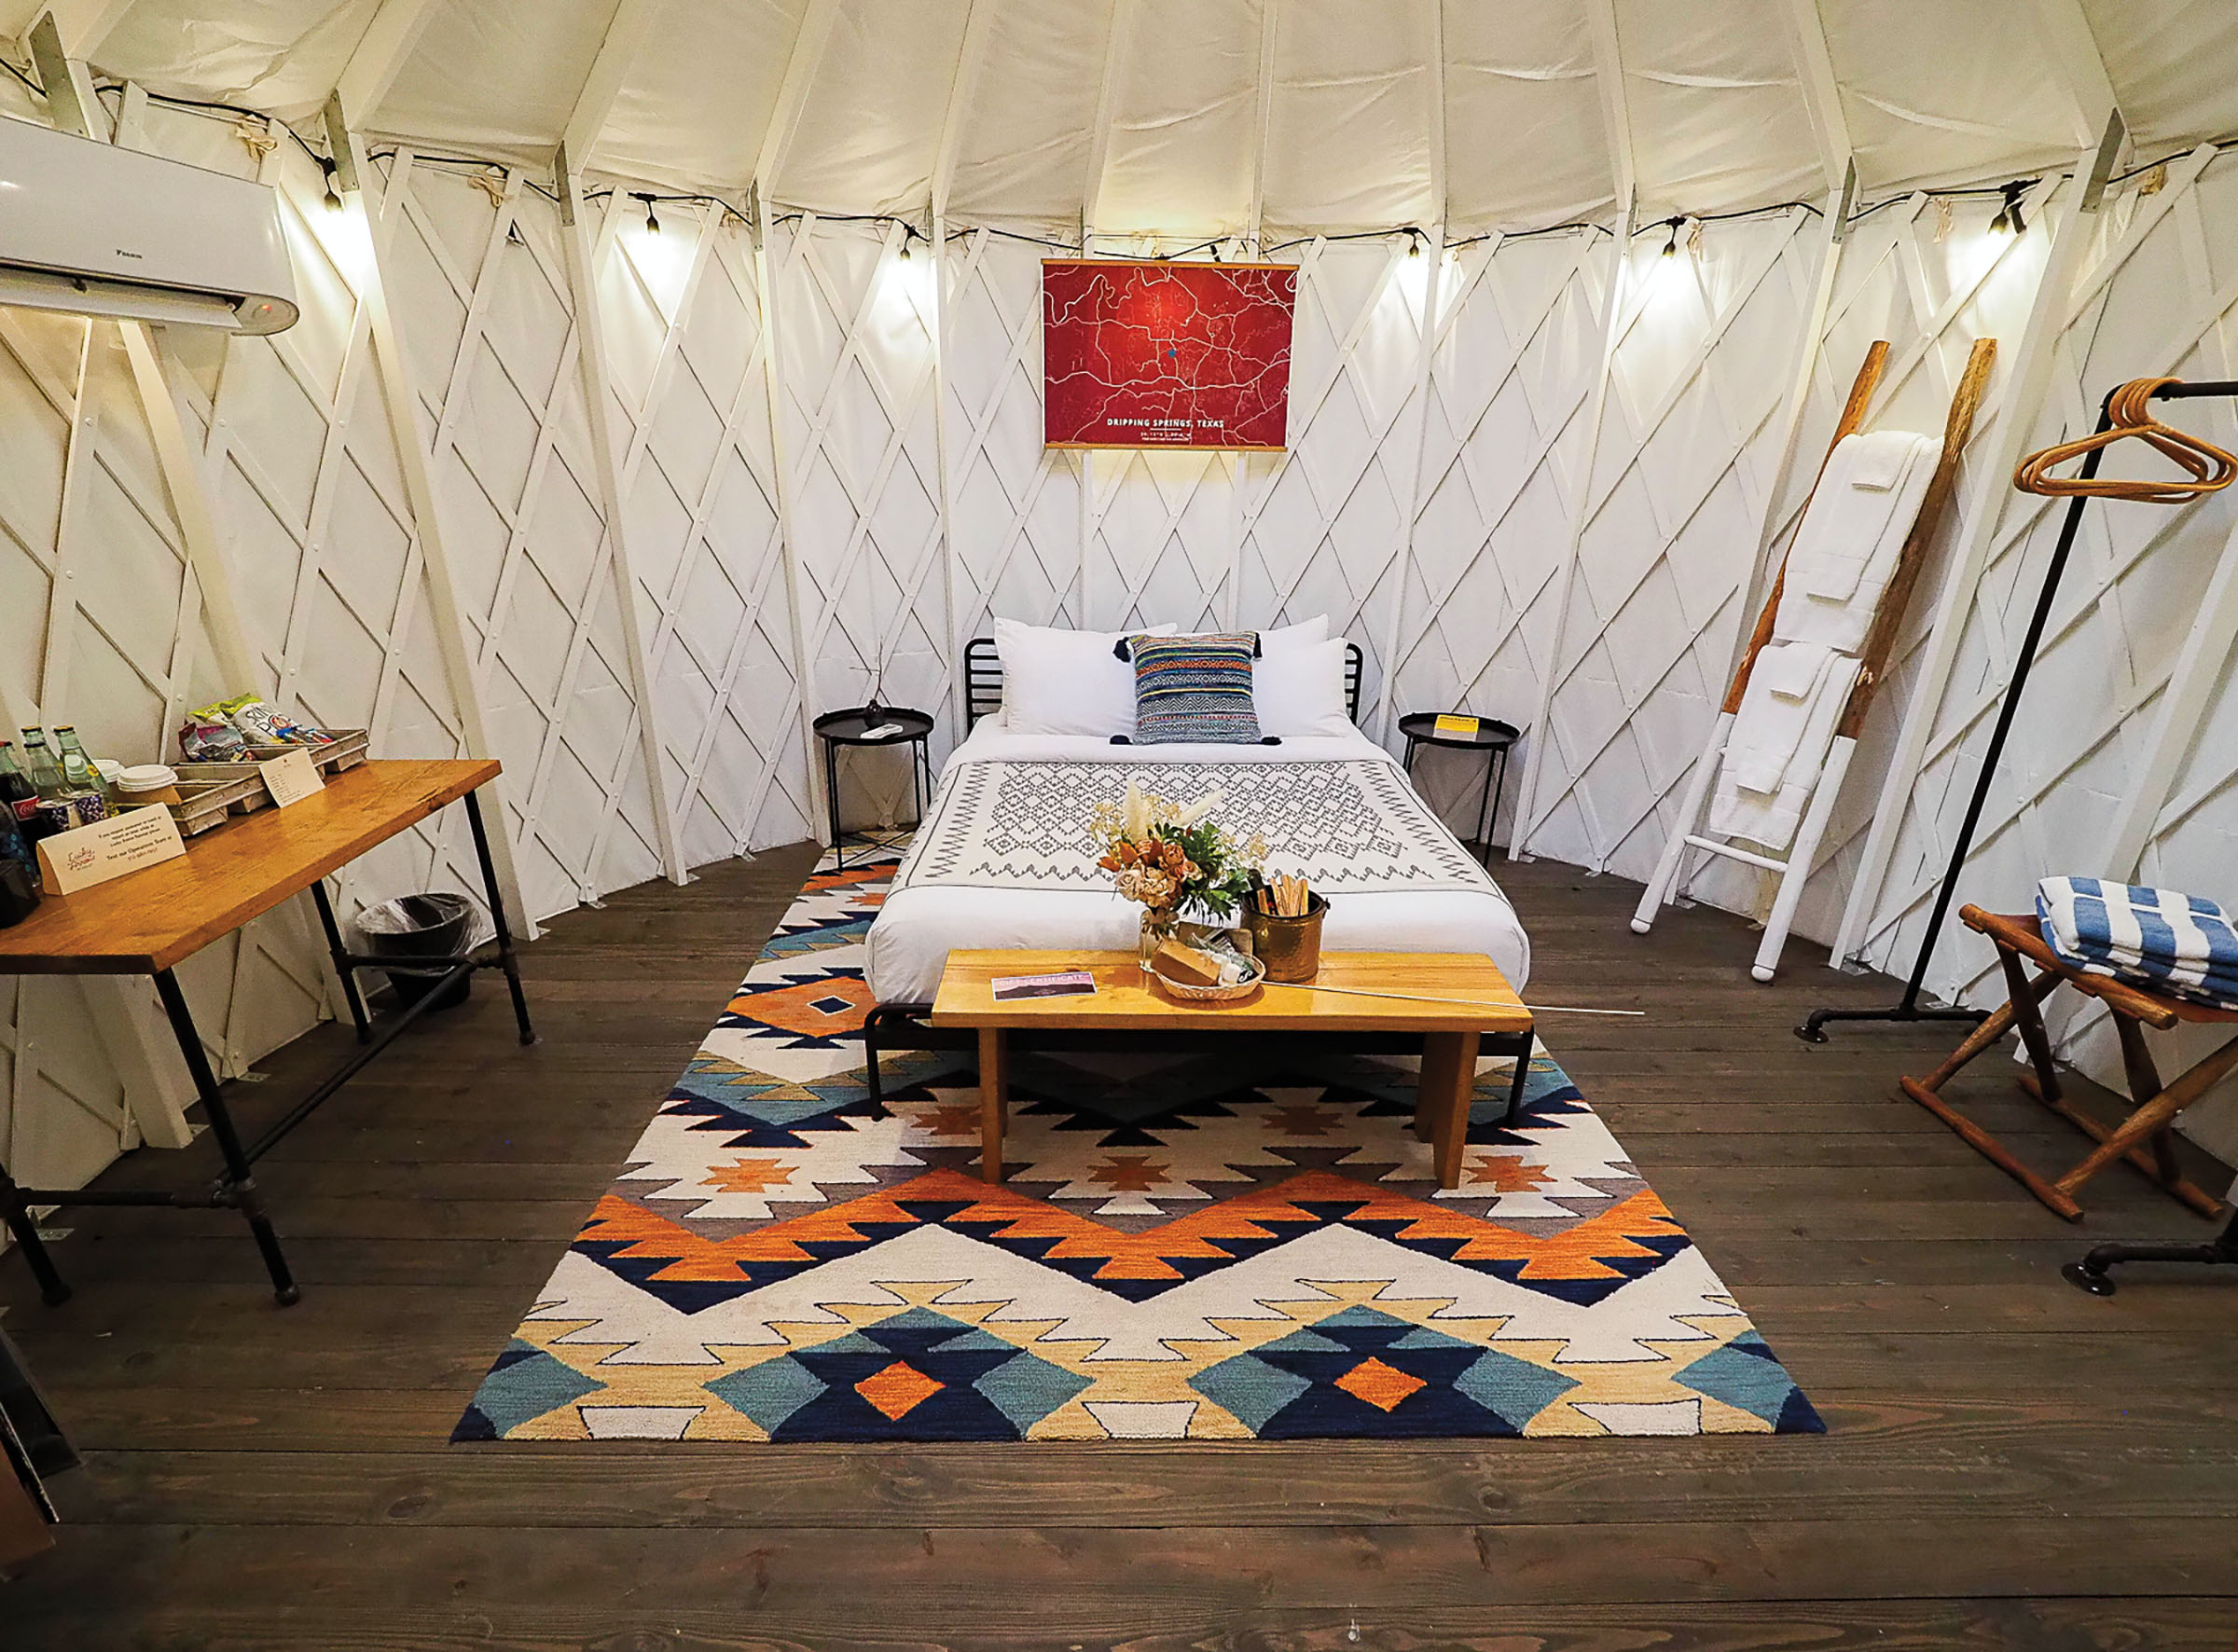 The inside of a glamping tent, with a large bed on a colorfully-patterned rug